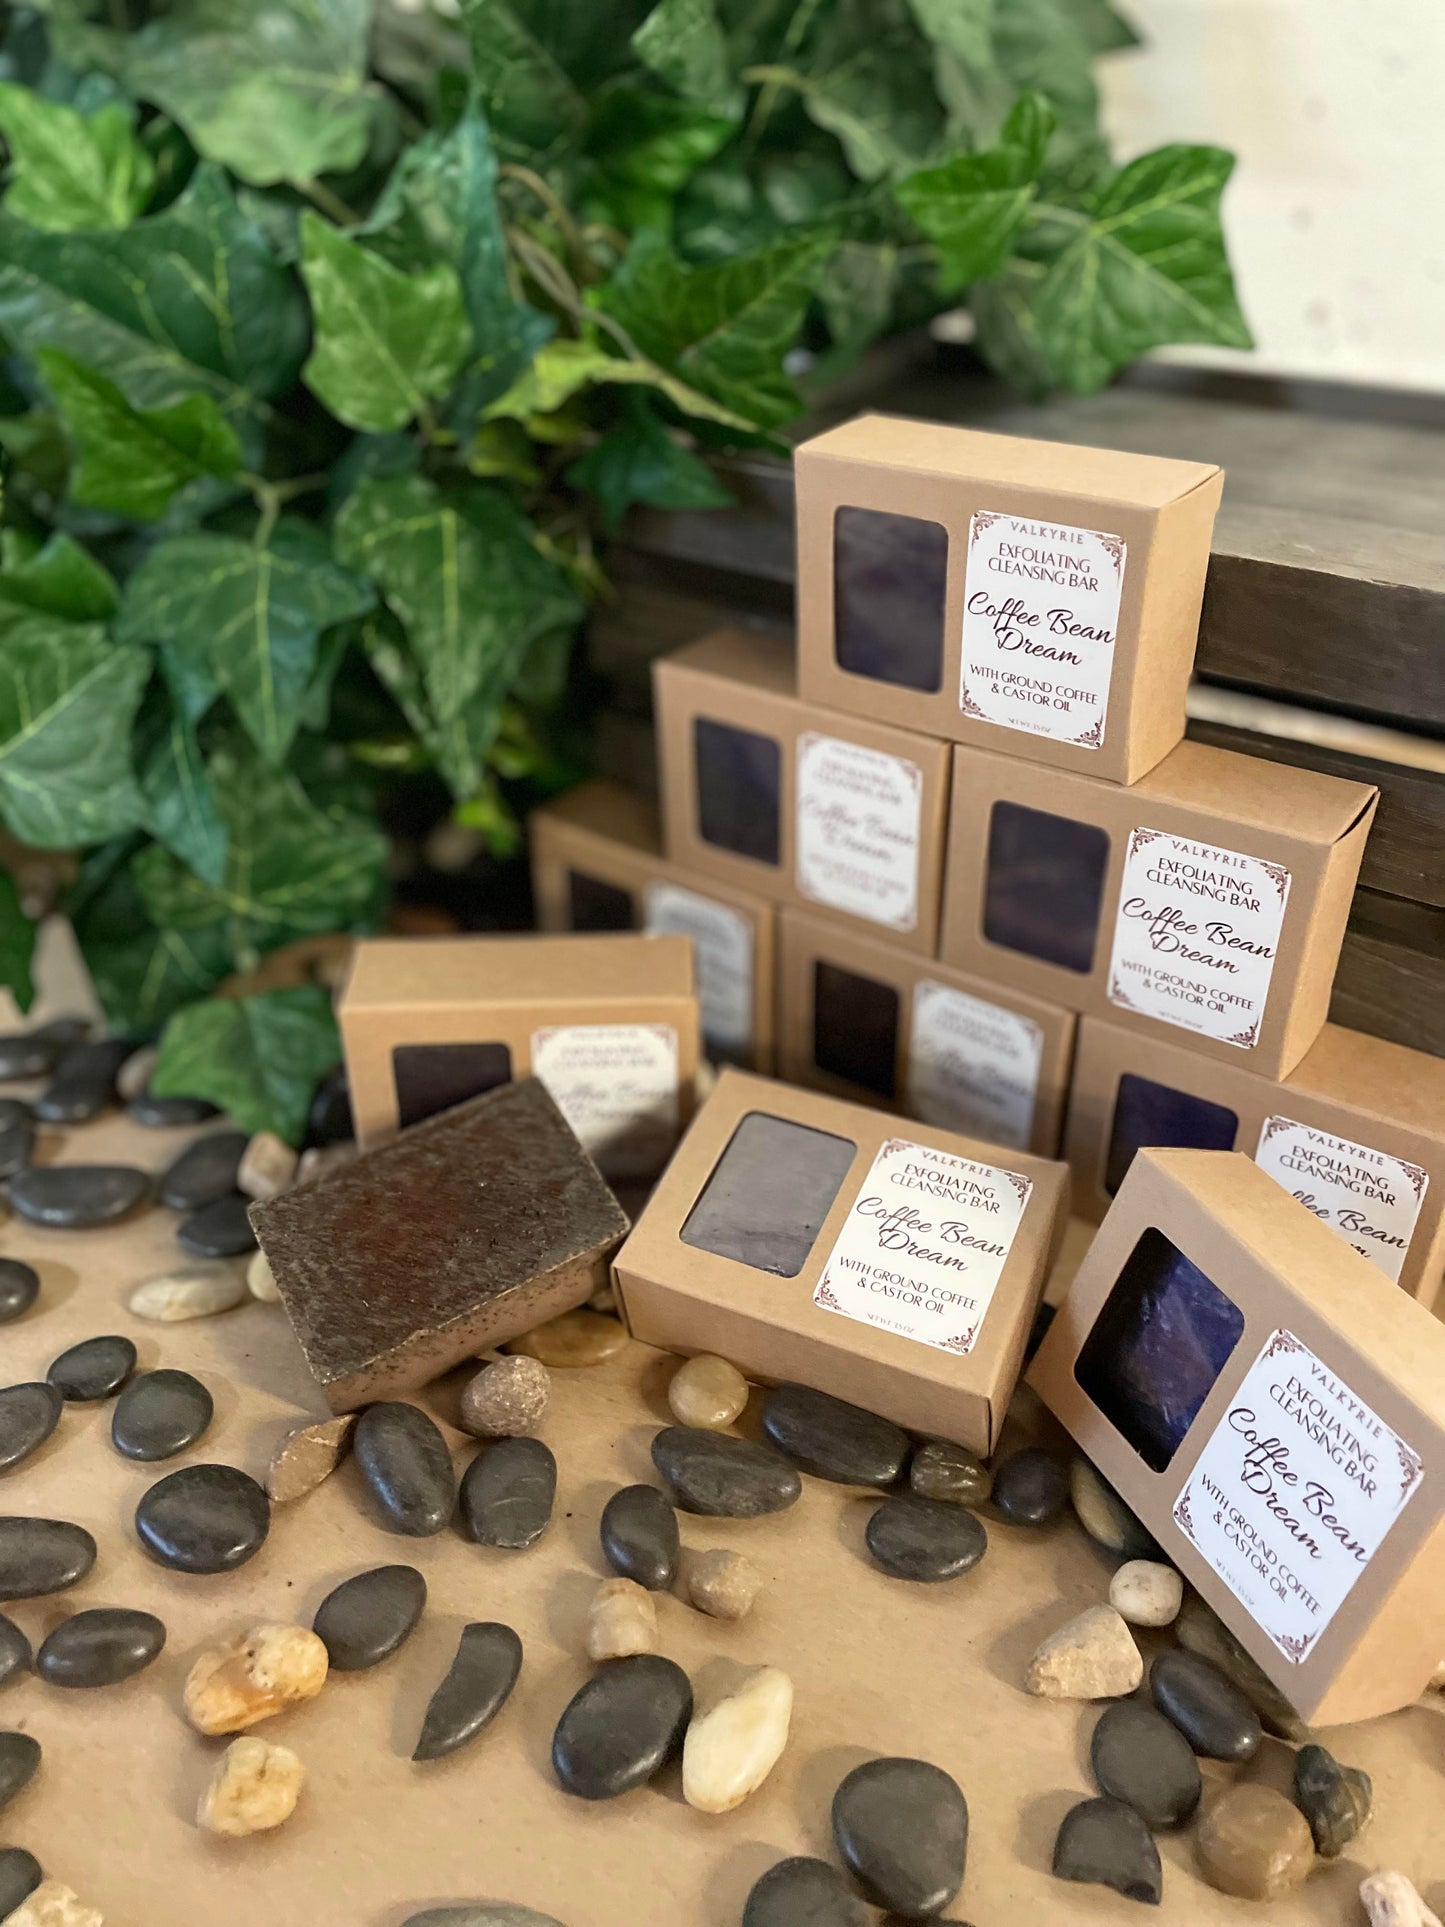 Coffee Bean Dream Exfoliating Cleansing Bar Valkyrie Global Skin Care Self Care Beauty St. Catharines Ontario Canada